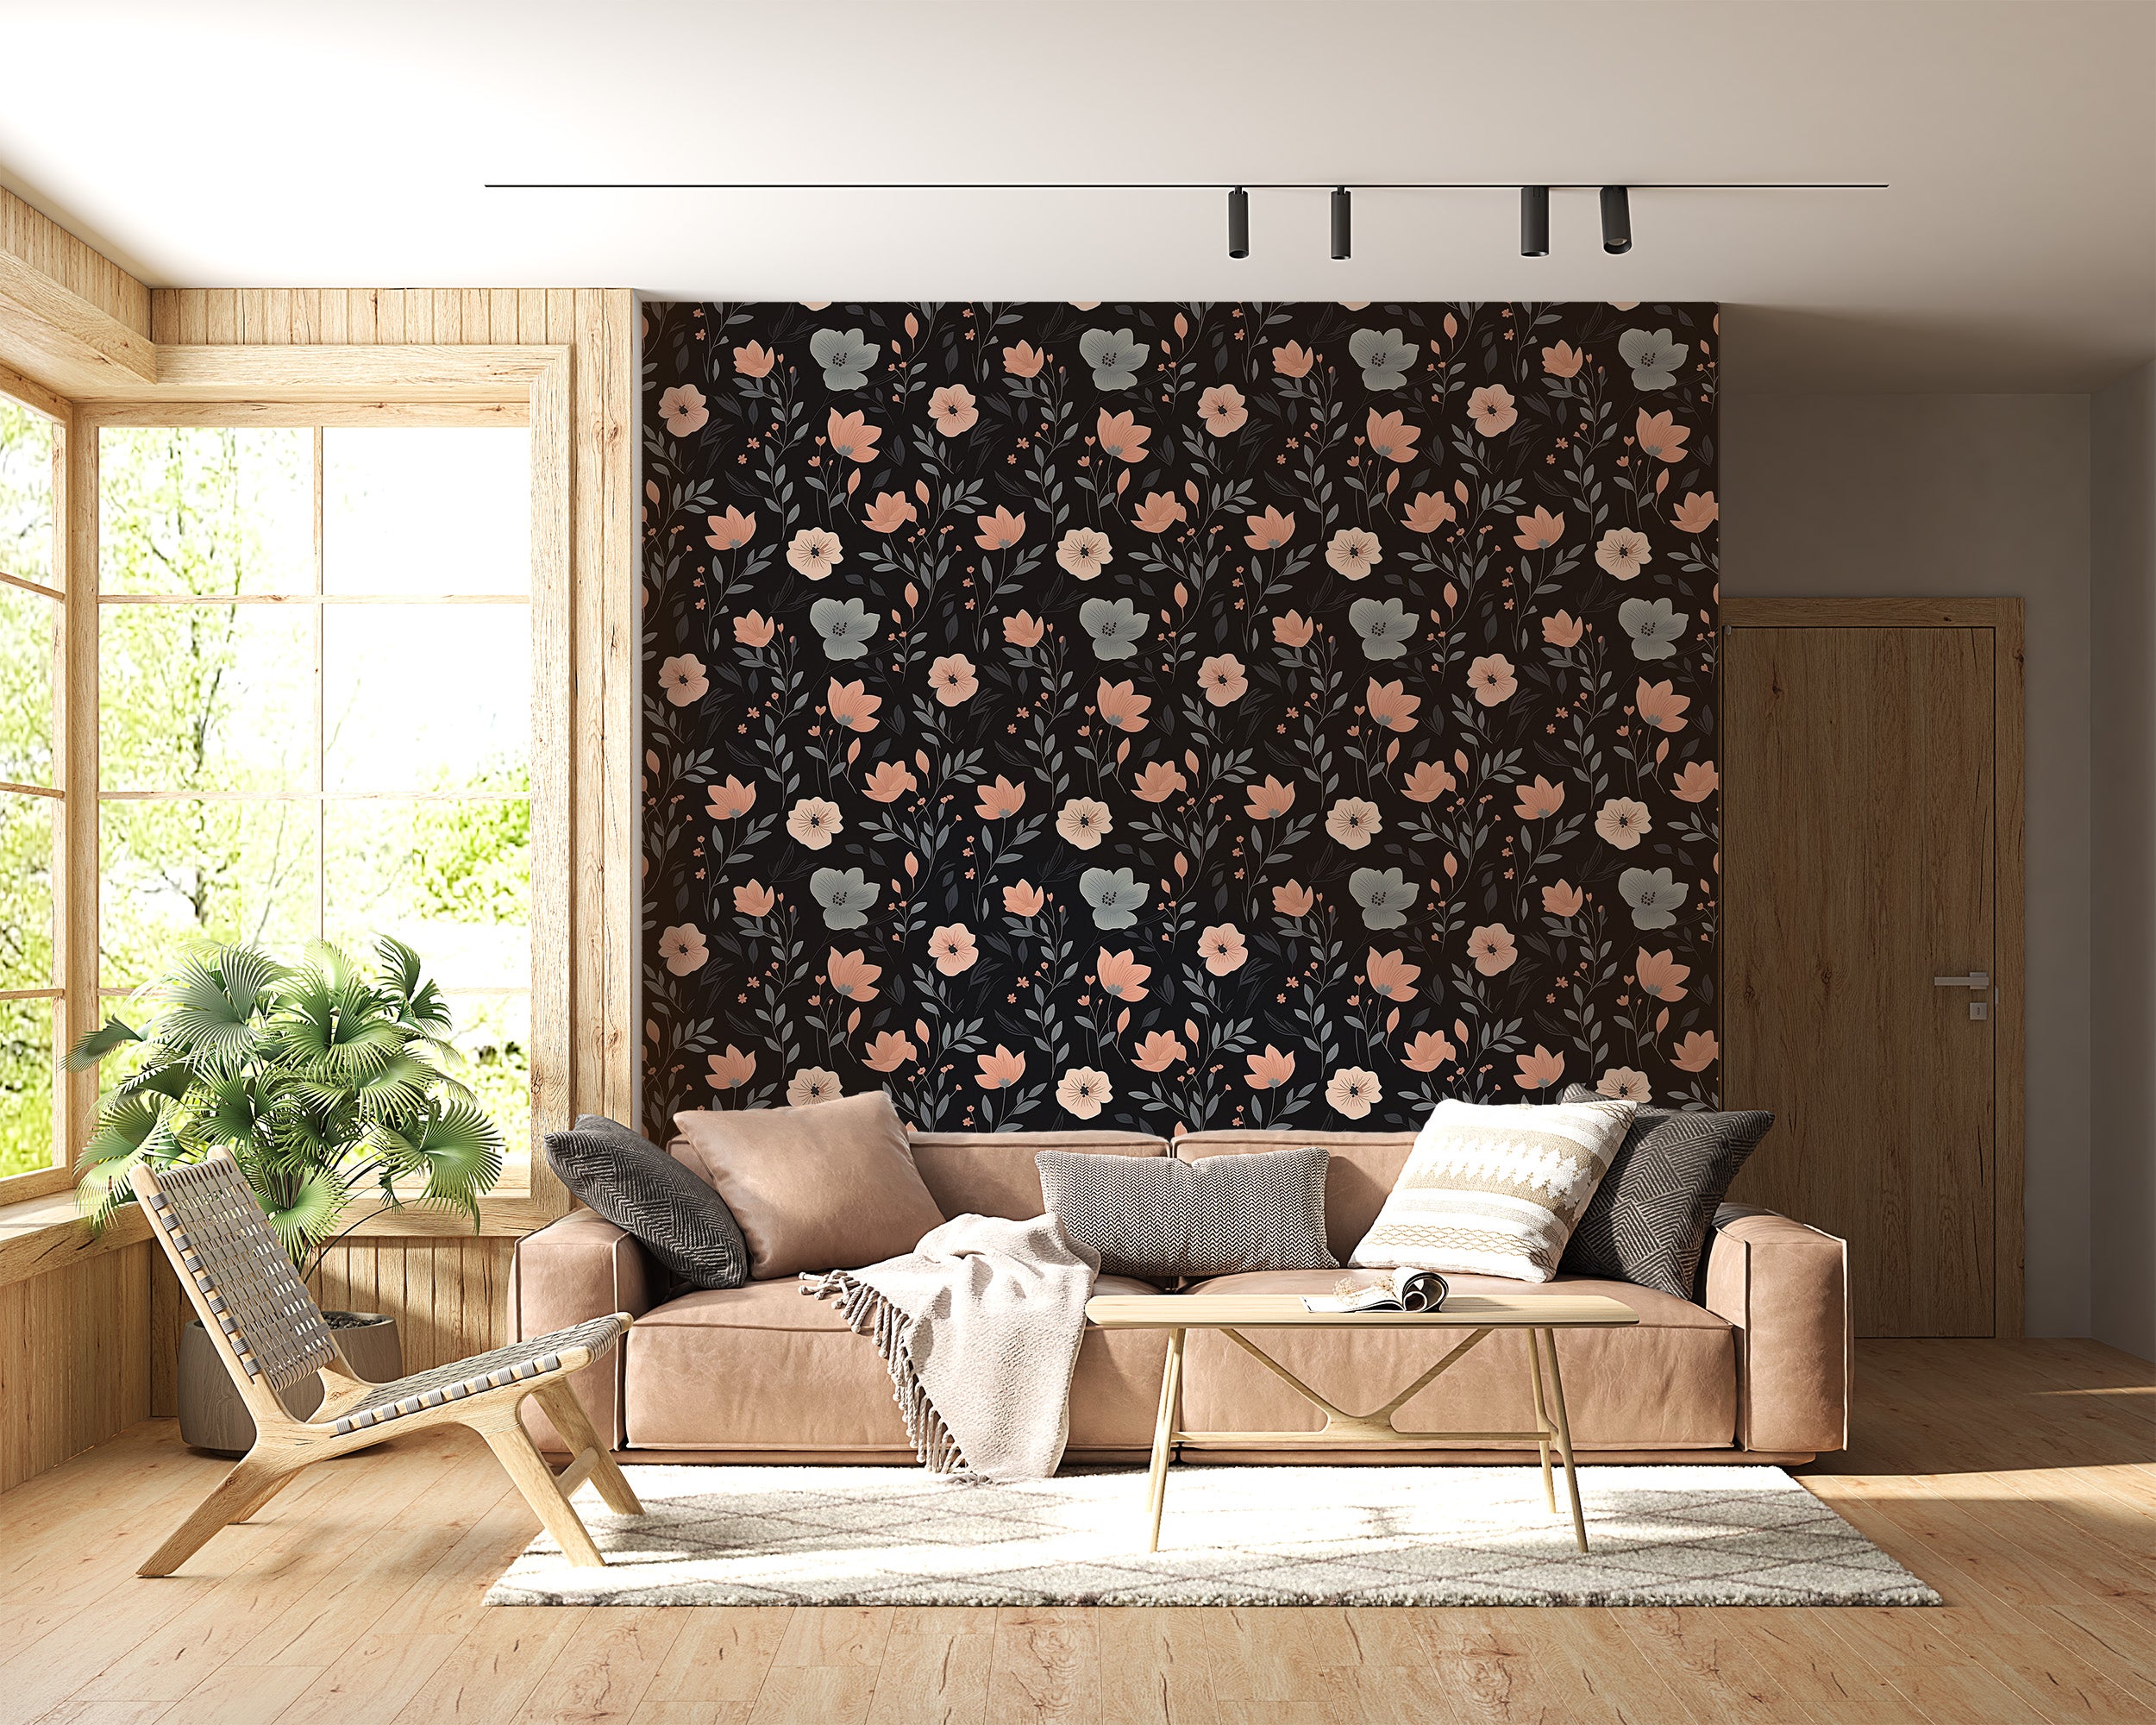 Effortless Application of Dramatic Blooms Wallpaper